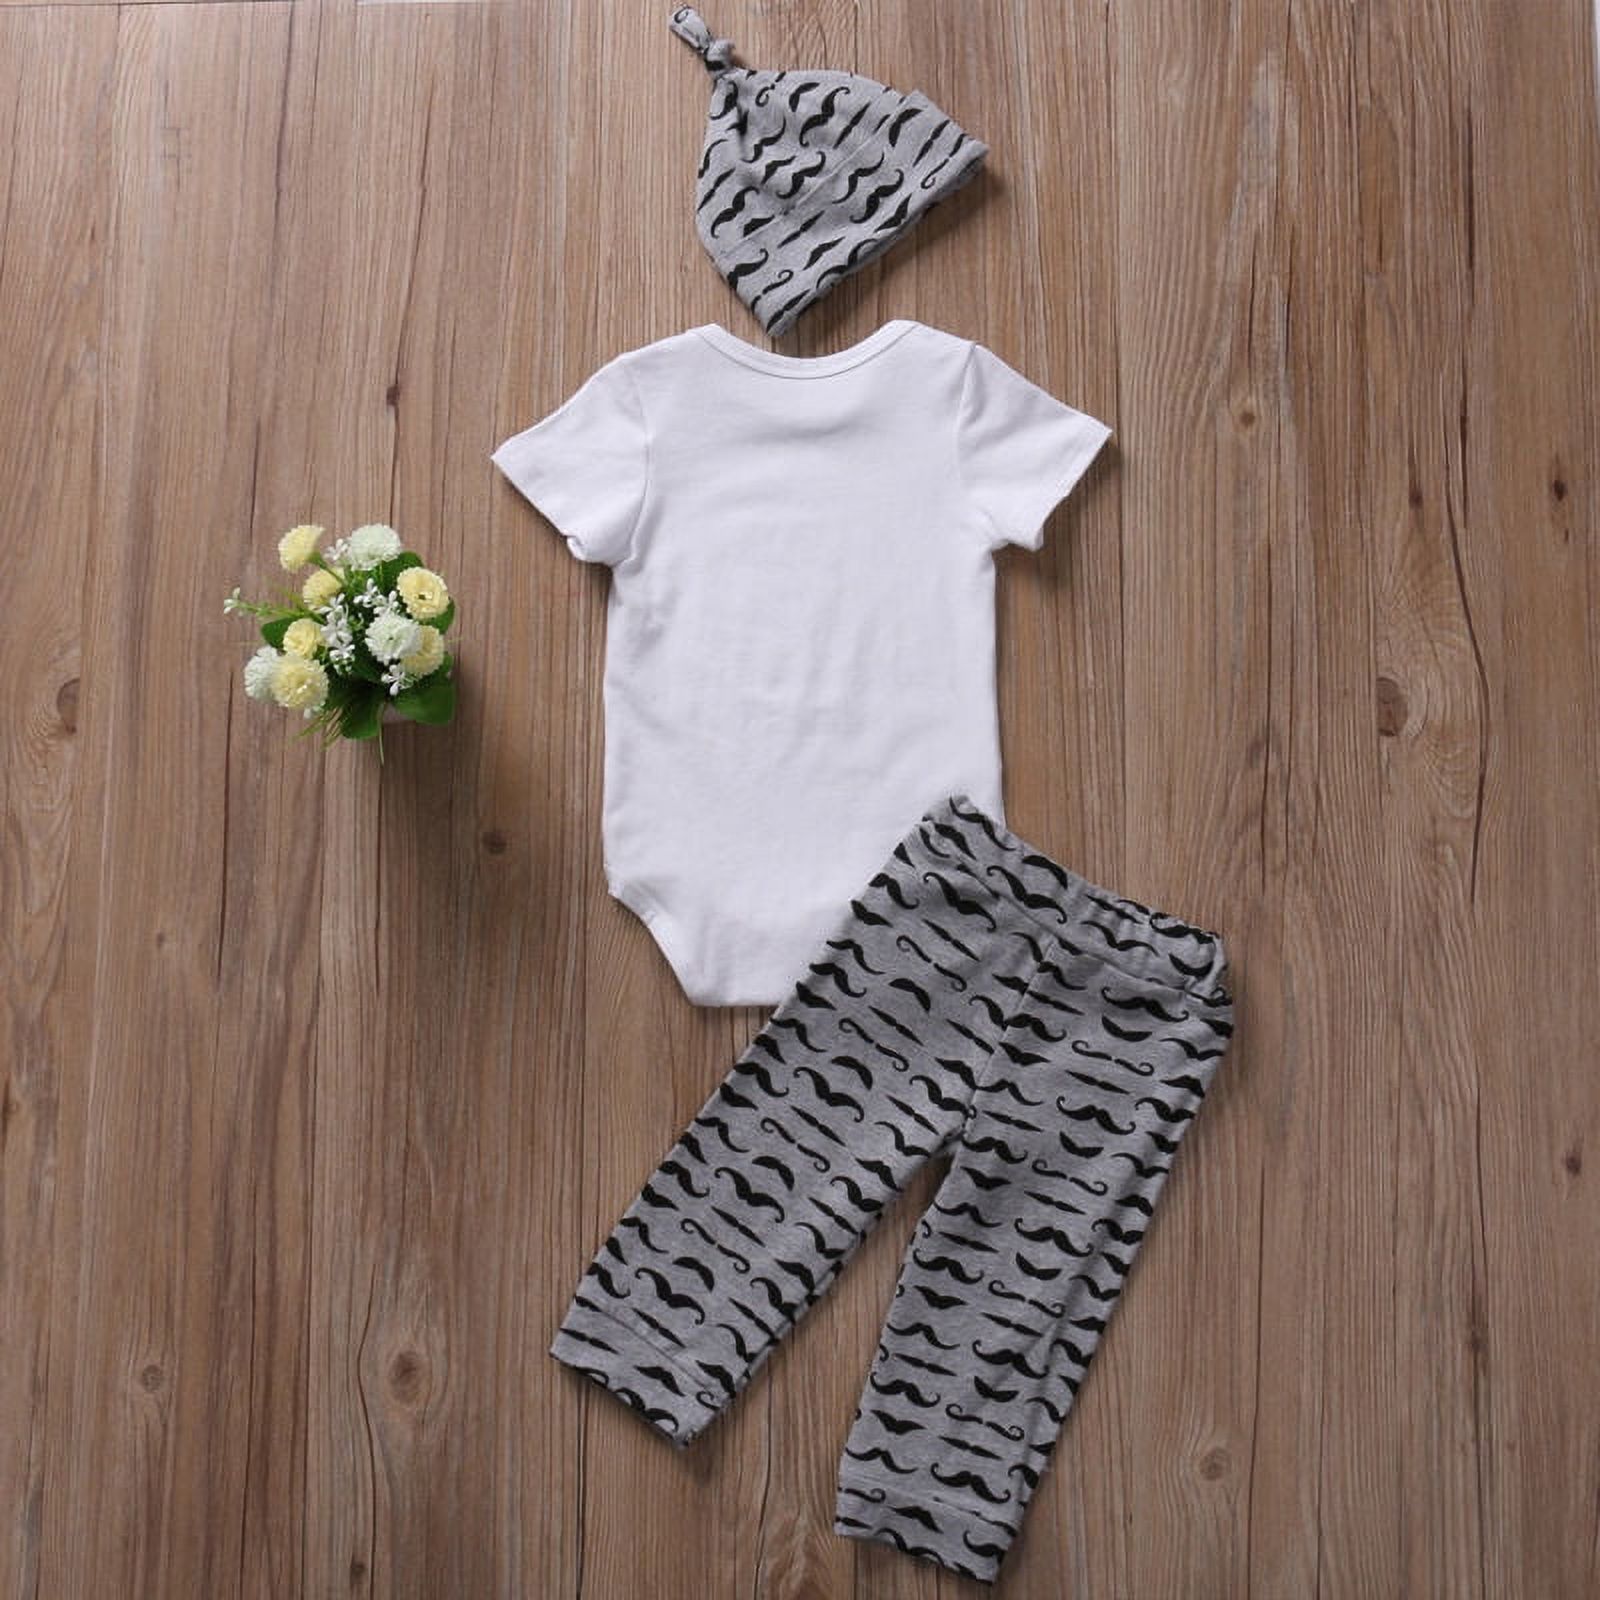 Newborn Baby Boy Infant Short Sleeve Romper + Long Pants +Hat Outfit Set Clothes - image 2 of 6